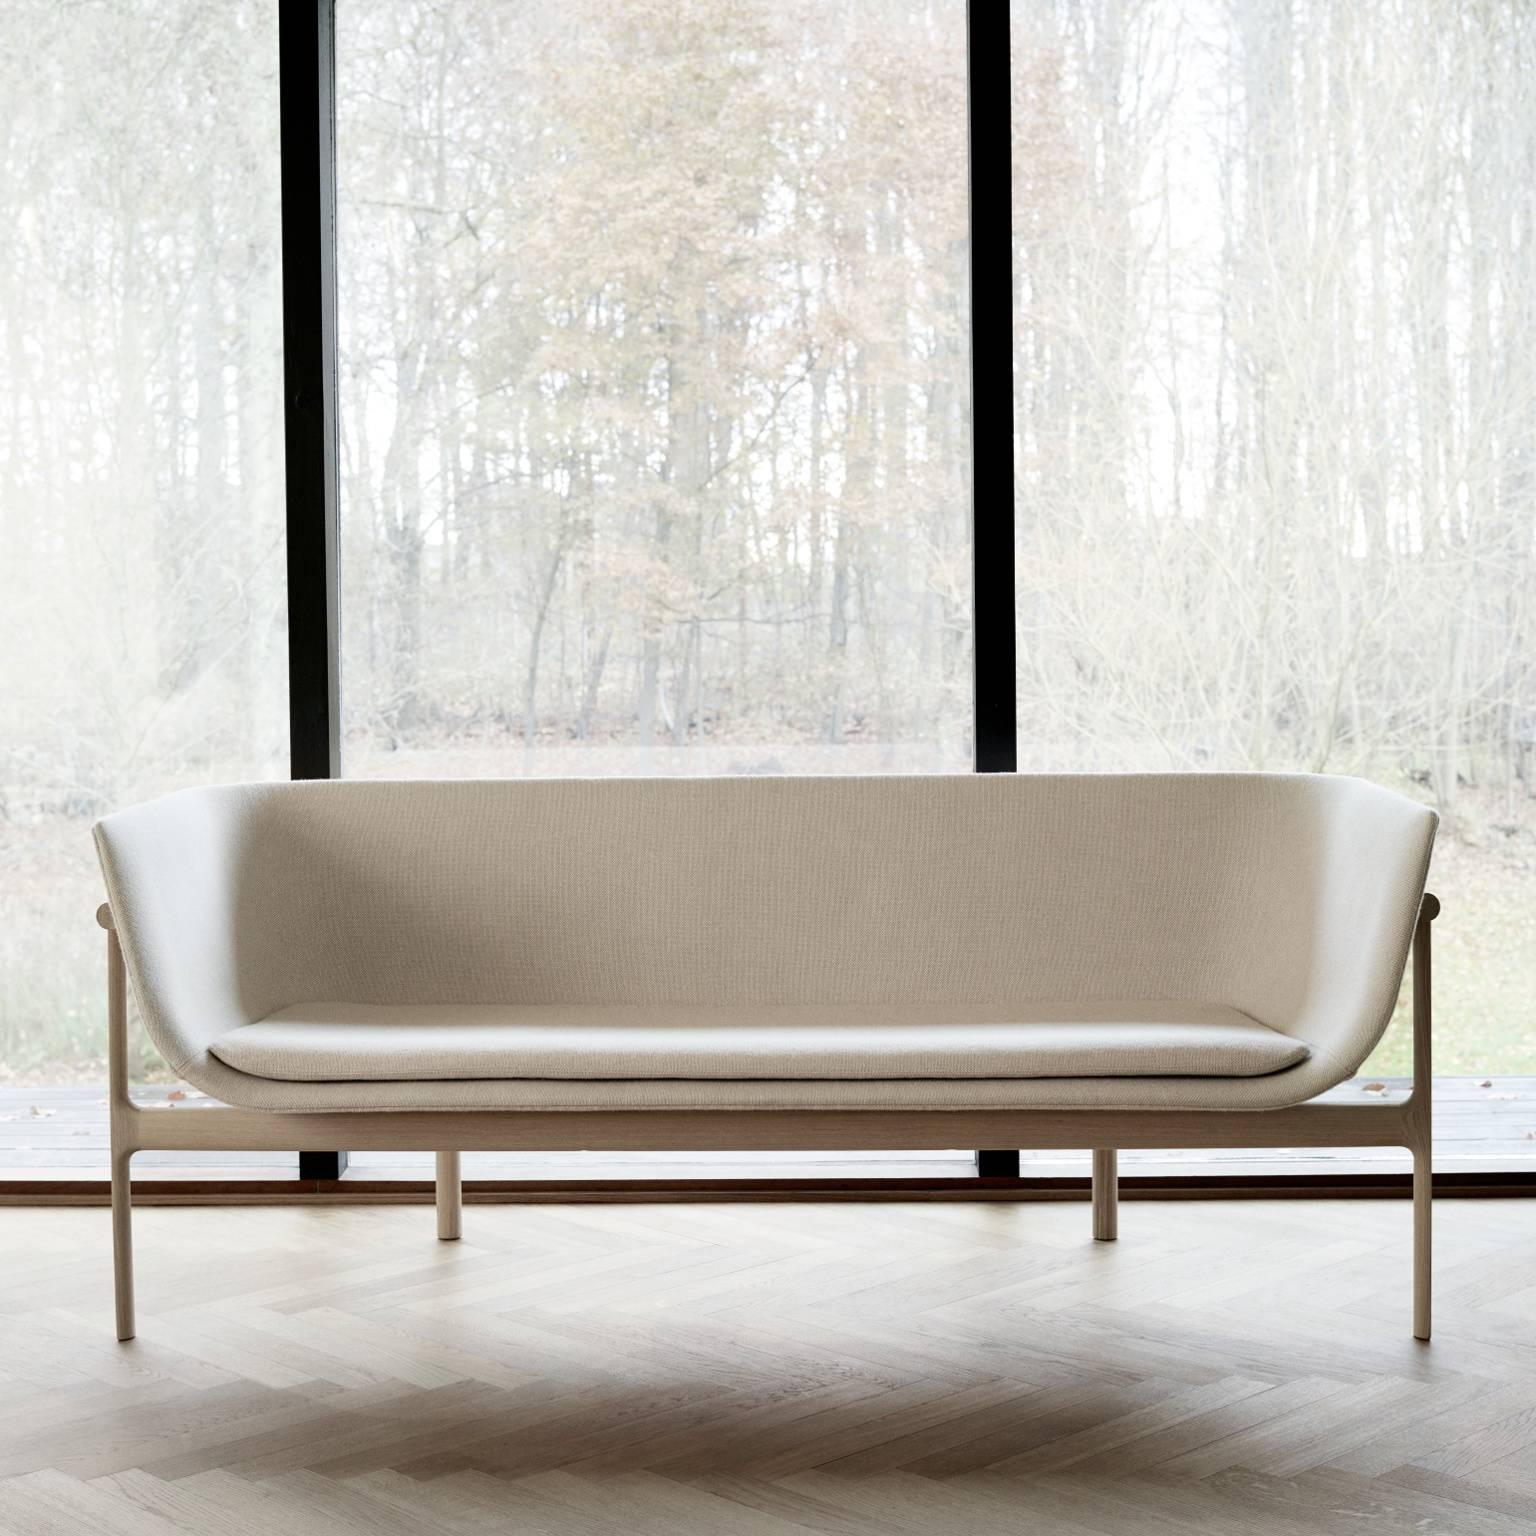 Lithuanian Tailor Lounge Sofa by Rui Alves, Natural Oak with Light Grey Fabric